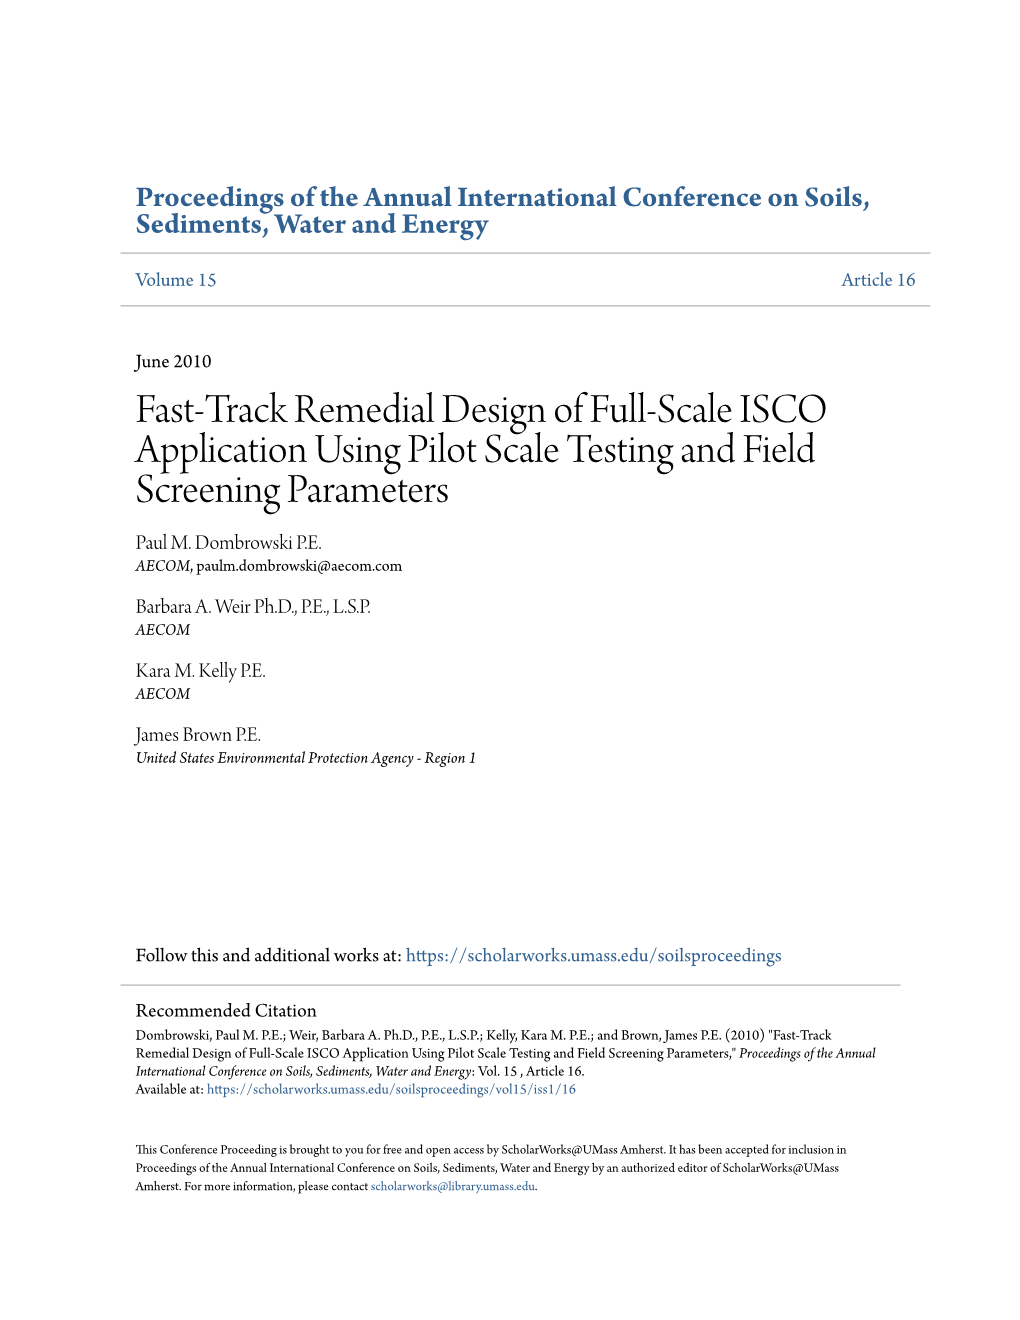 Fast-Track Remedial Design of Full-Scale ISCO Application Using Pilot Scale Testing and Field Screening Parameters Paul M